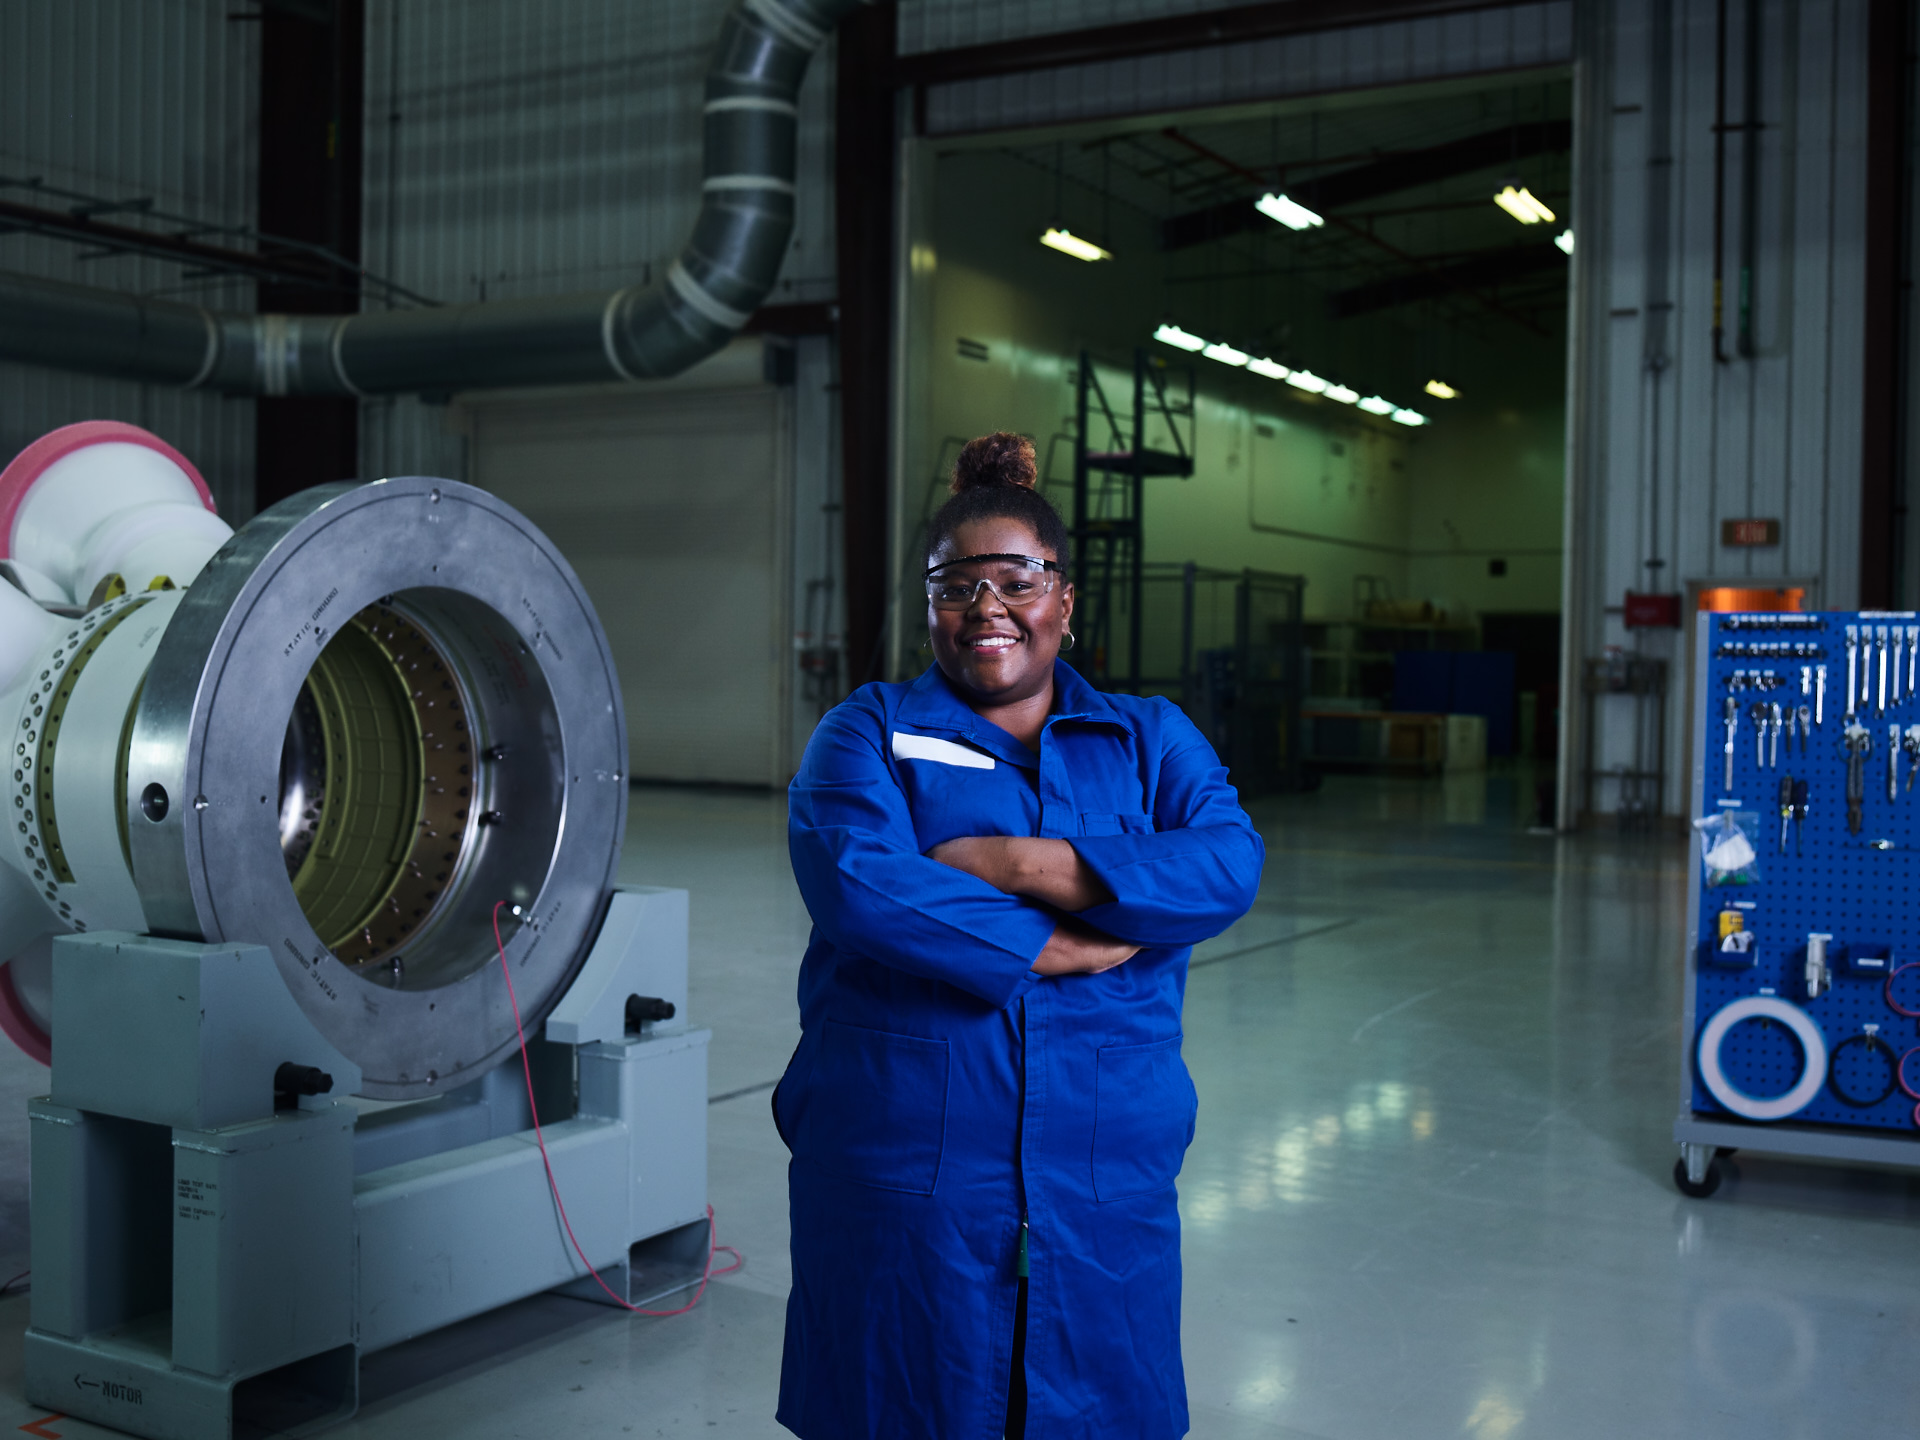 Black female in blue lab coat and safety goggles stands in manufacturing plant in front of rocket motor frame.